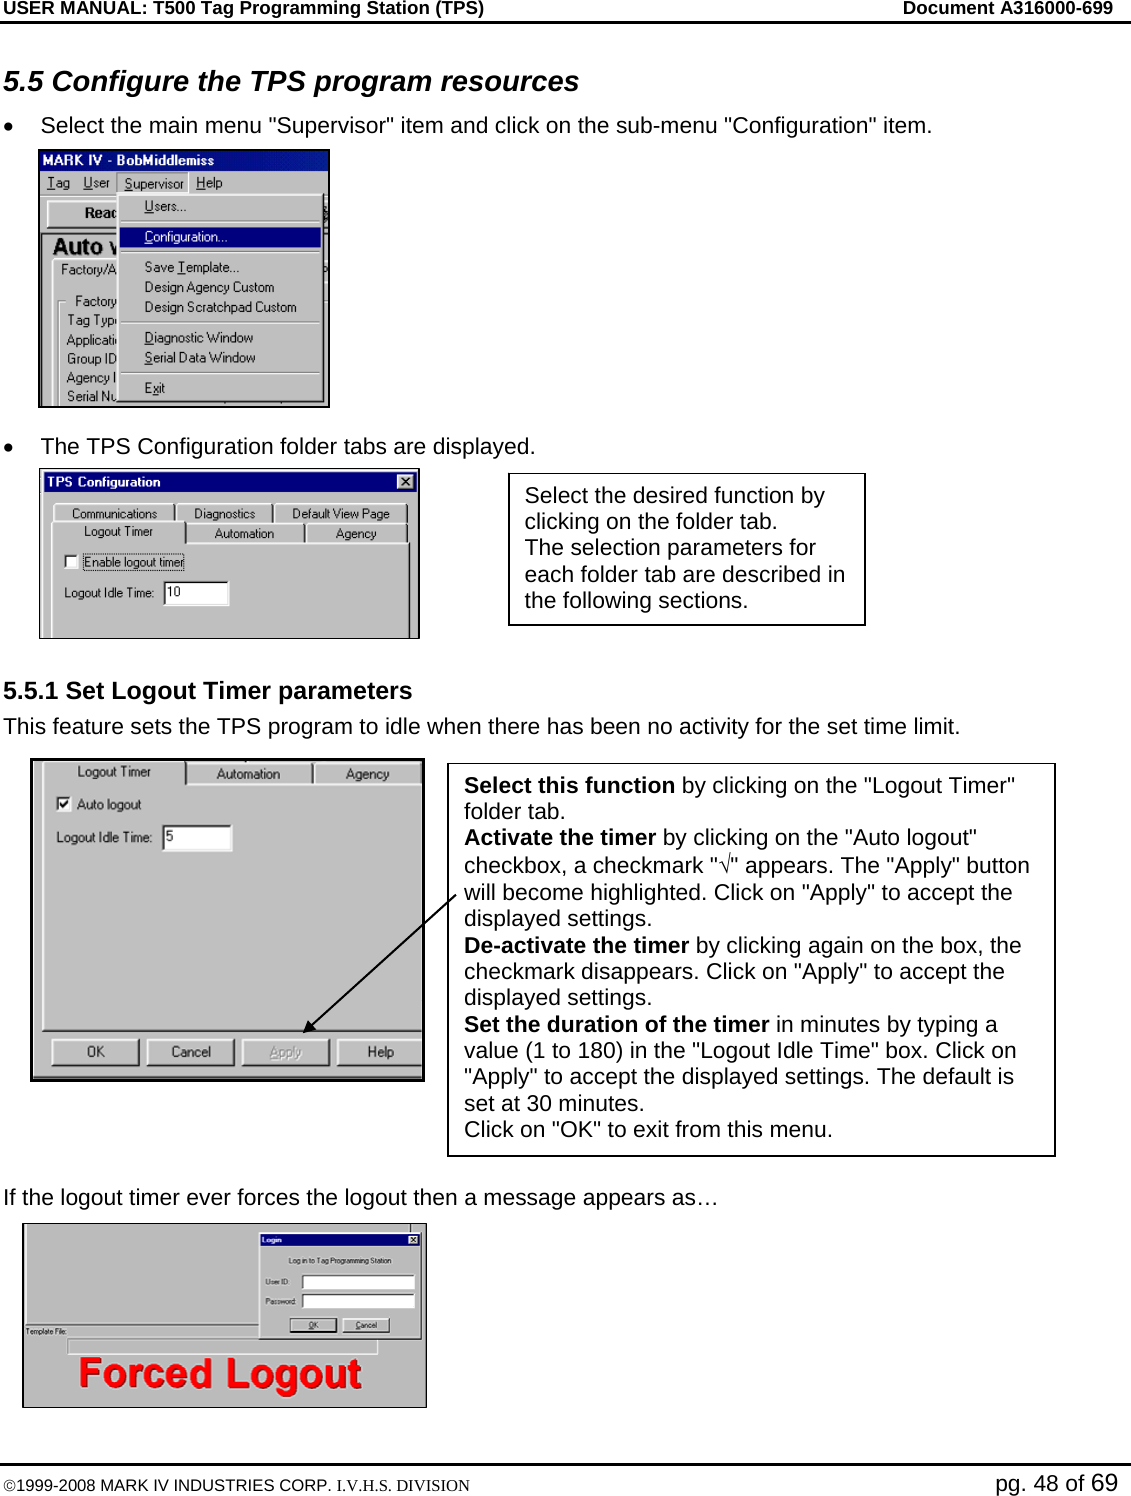 USER MANUAL: T500 Tag Programming Station (TPS)     Document A316000-699  ©1999-2008 MARK IV INDUSTRIES CORP. I.V.H.S. DIVISION   pg. 48 of 69 5.5 Configure the TPS program resources •  Select the main menu &quot;Supervisor&quot; item and click on the sub-menu &quot;Configuration&quot; item.  •  The TPS Configuration folder tabs are displayed.  5.5.1 Set Logout Timer parameters This feature sets the TPS program to idle when there has been no activity for the set time limit.     If the logout timer ever forces the logout then a message appears as… Select the desired function by clicking on the folder tab. The selection parameters for each folder tab are described in the following sections. Select this function by clicking on the &quot;Logout Timer&quot; folder tab. Activate the timer by clicking on the &quot;Auto logout&quot; checkbox, a checkmark &quot;√&quot; appears. The &quot;Apply&quot; button will become highlighted. Click on &quot;Apply&quot; to accept the displayed settings. De-activate the timer by clicking again on the box, the checkmark disappears. Click on &quot;Apply&quot; to accept the displayed settings. Set the duration of the timer in minutes by typing a value (1 to 180) in the &quot;Logout Idle Time&quot; box. Click on &quot;Apply&quot; to accept the displayed settings. The default is set at 30 minutes. Click on &quot;OK&quot; to exit from this menu. 